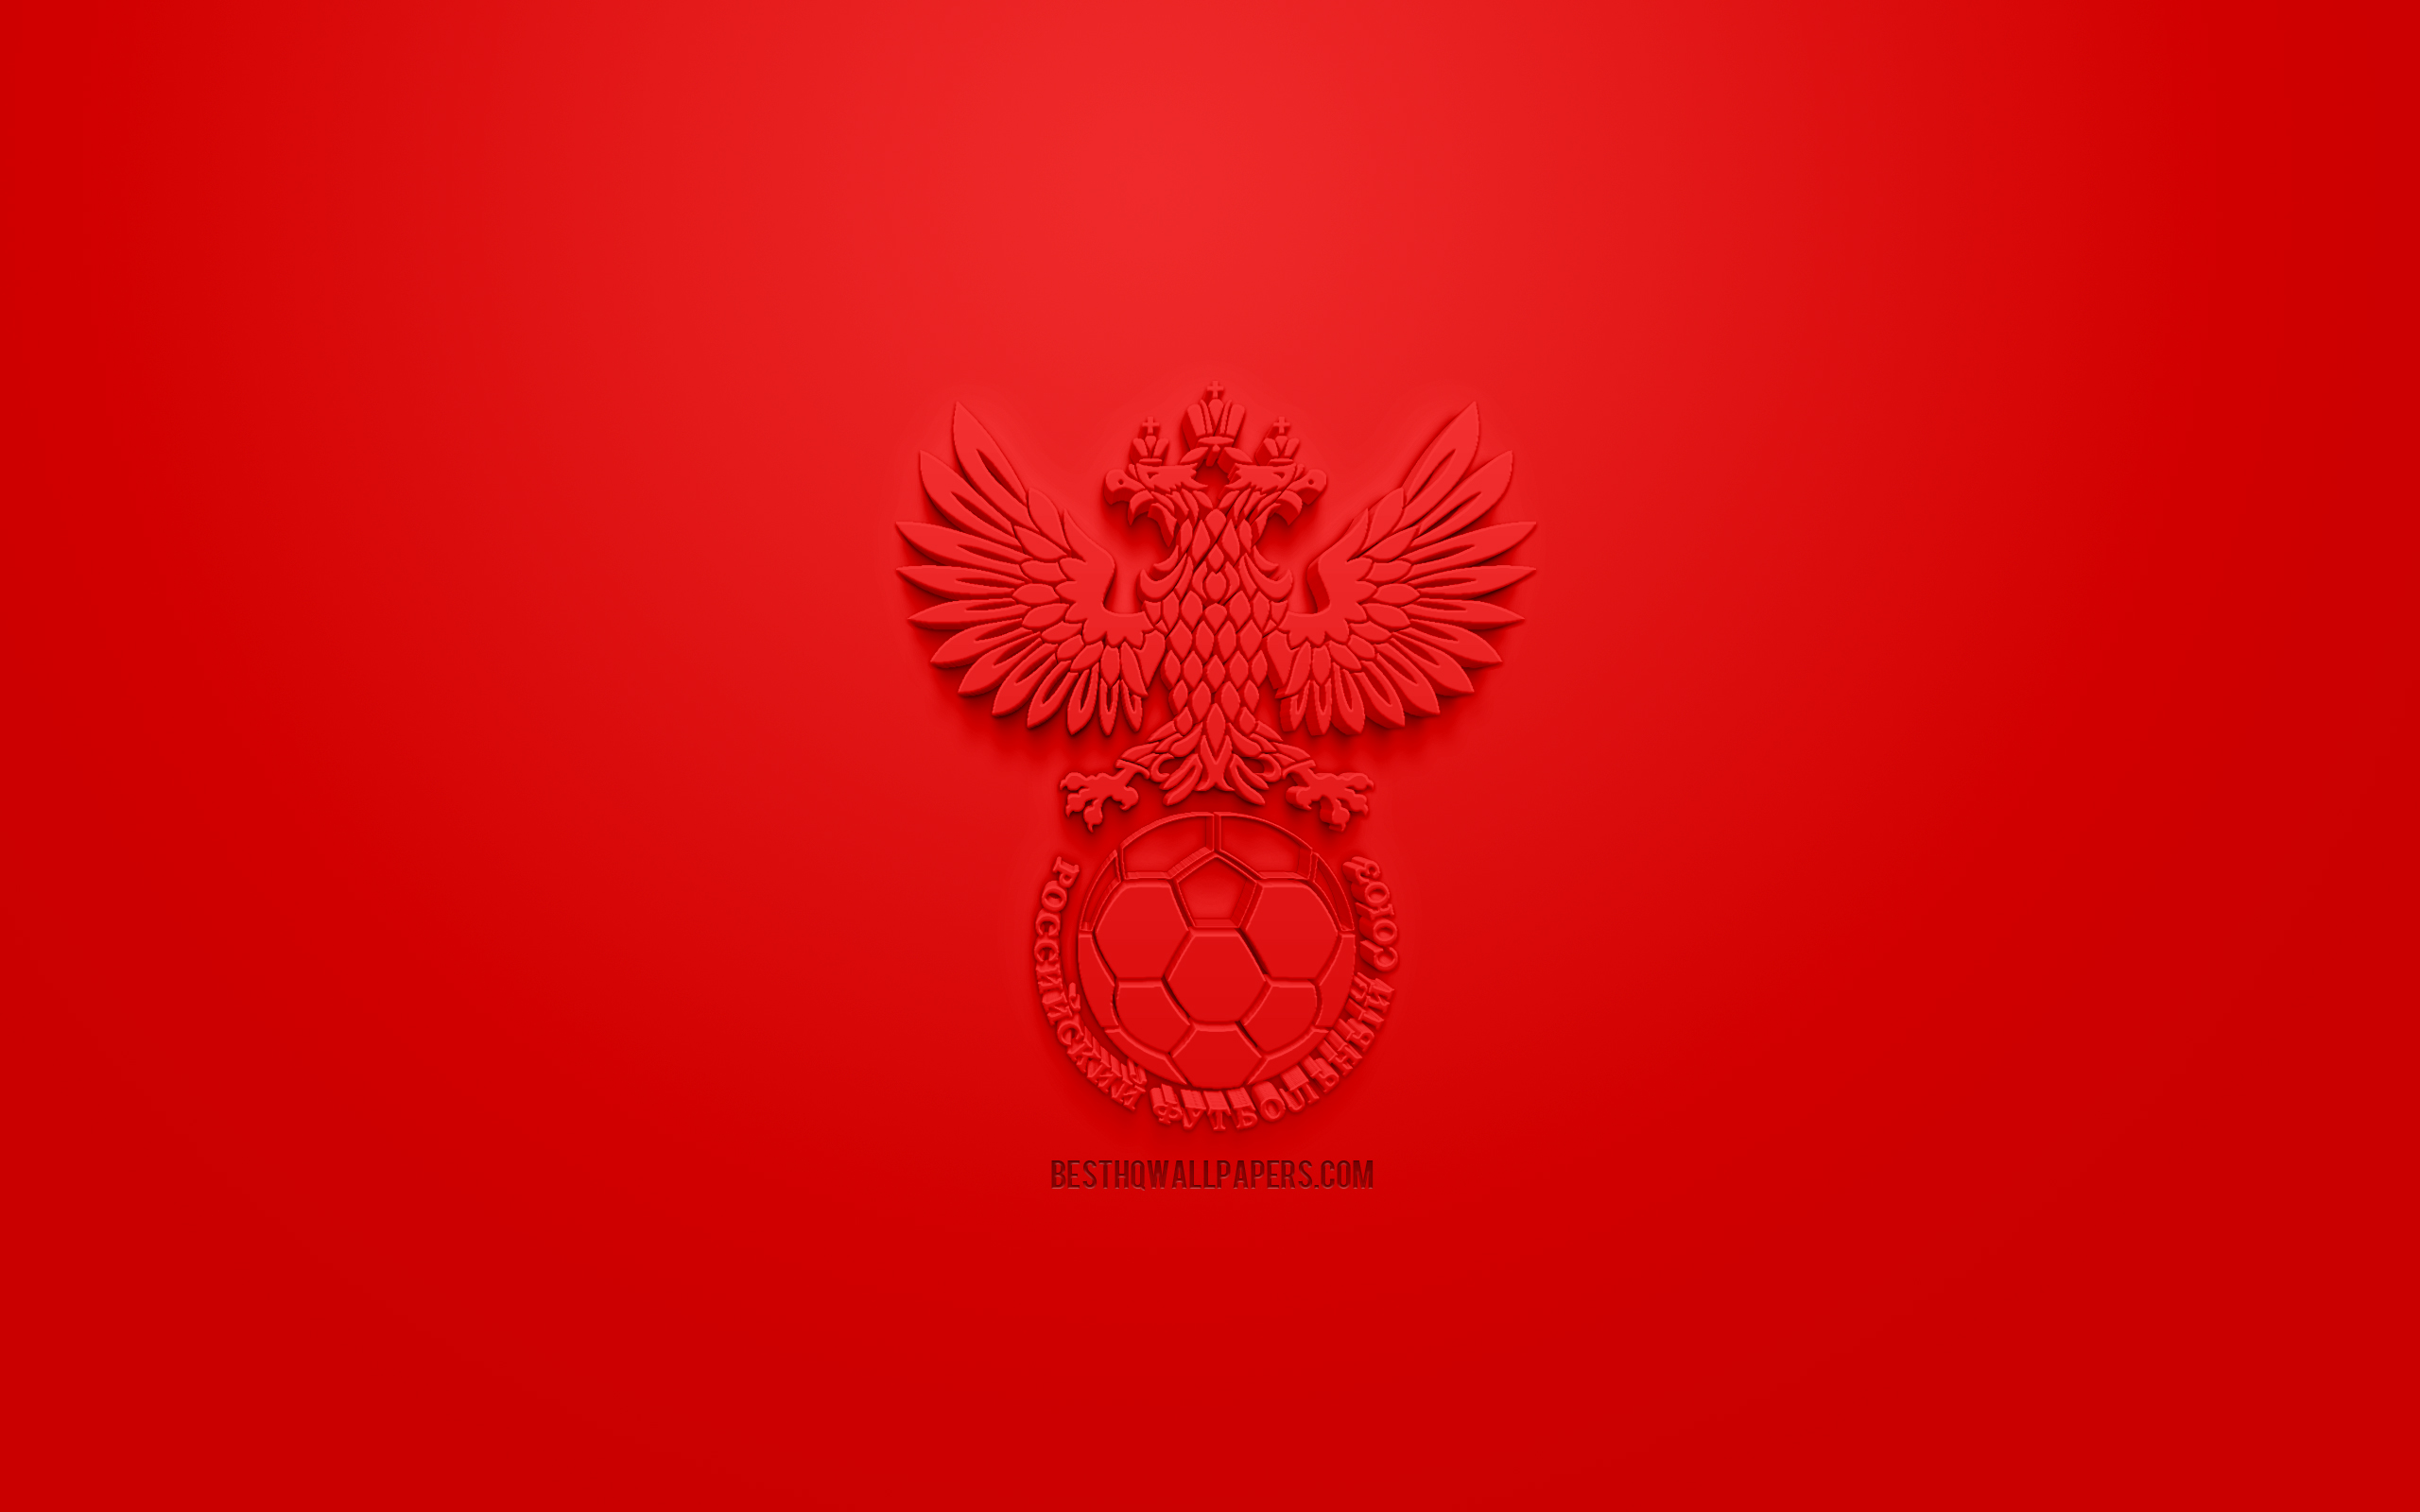 Download wallpapers Russia national football team, creative 3D logo